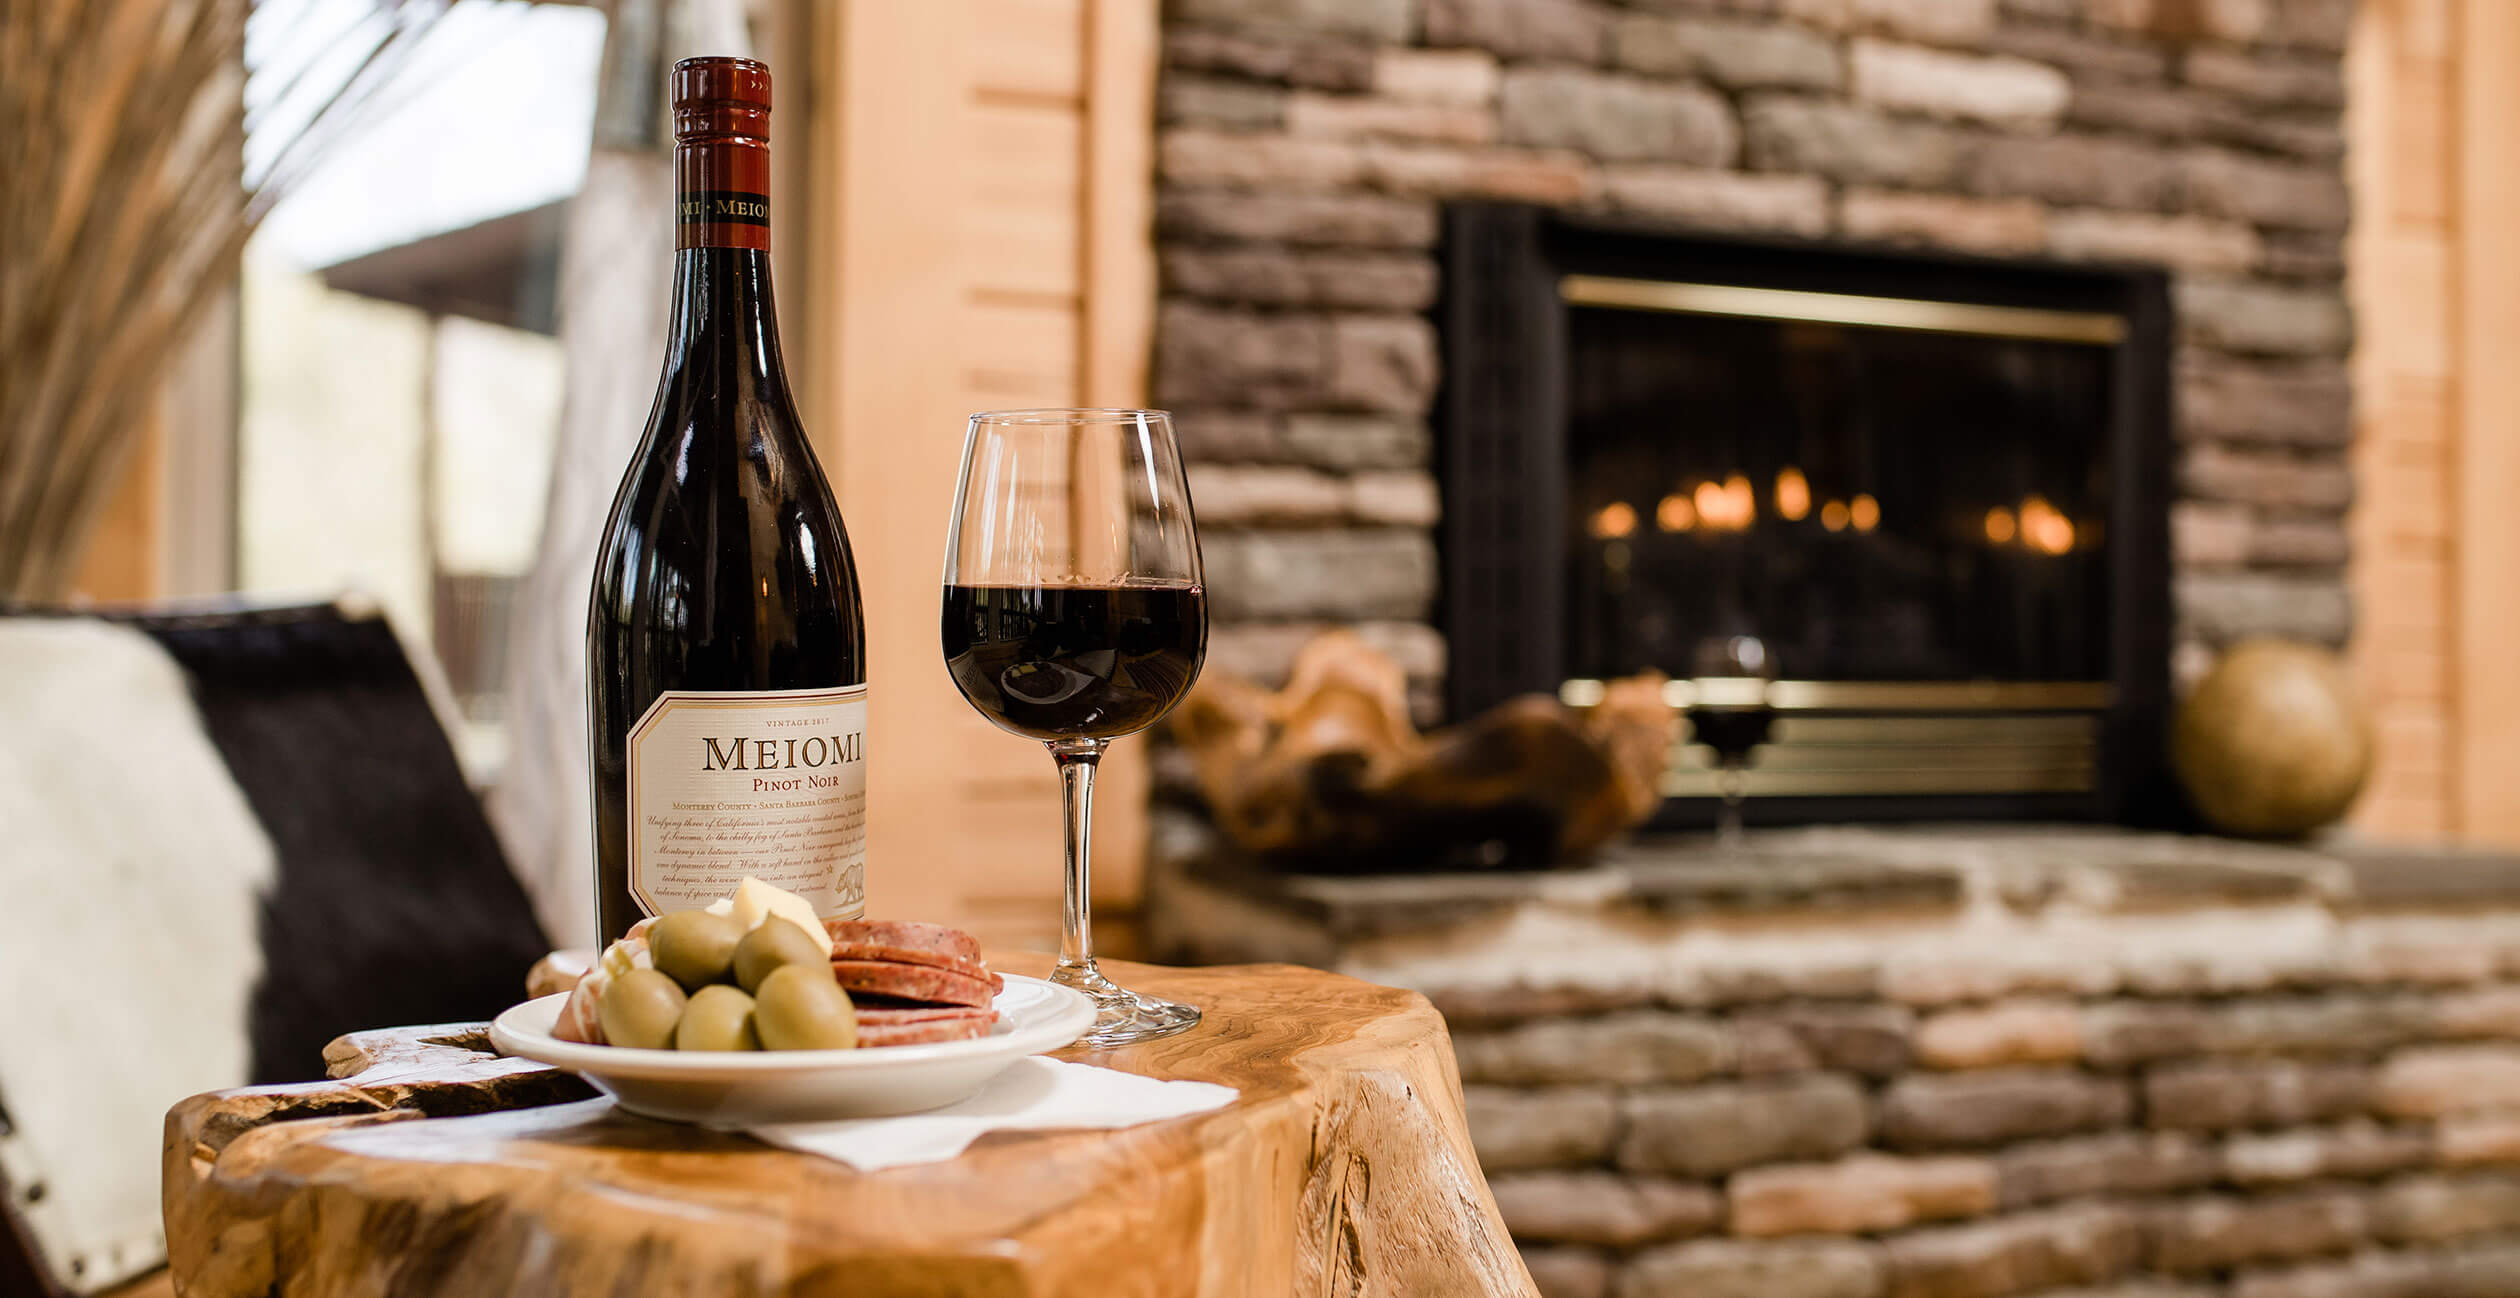 Wine and charcuterie on a small table by the fire